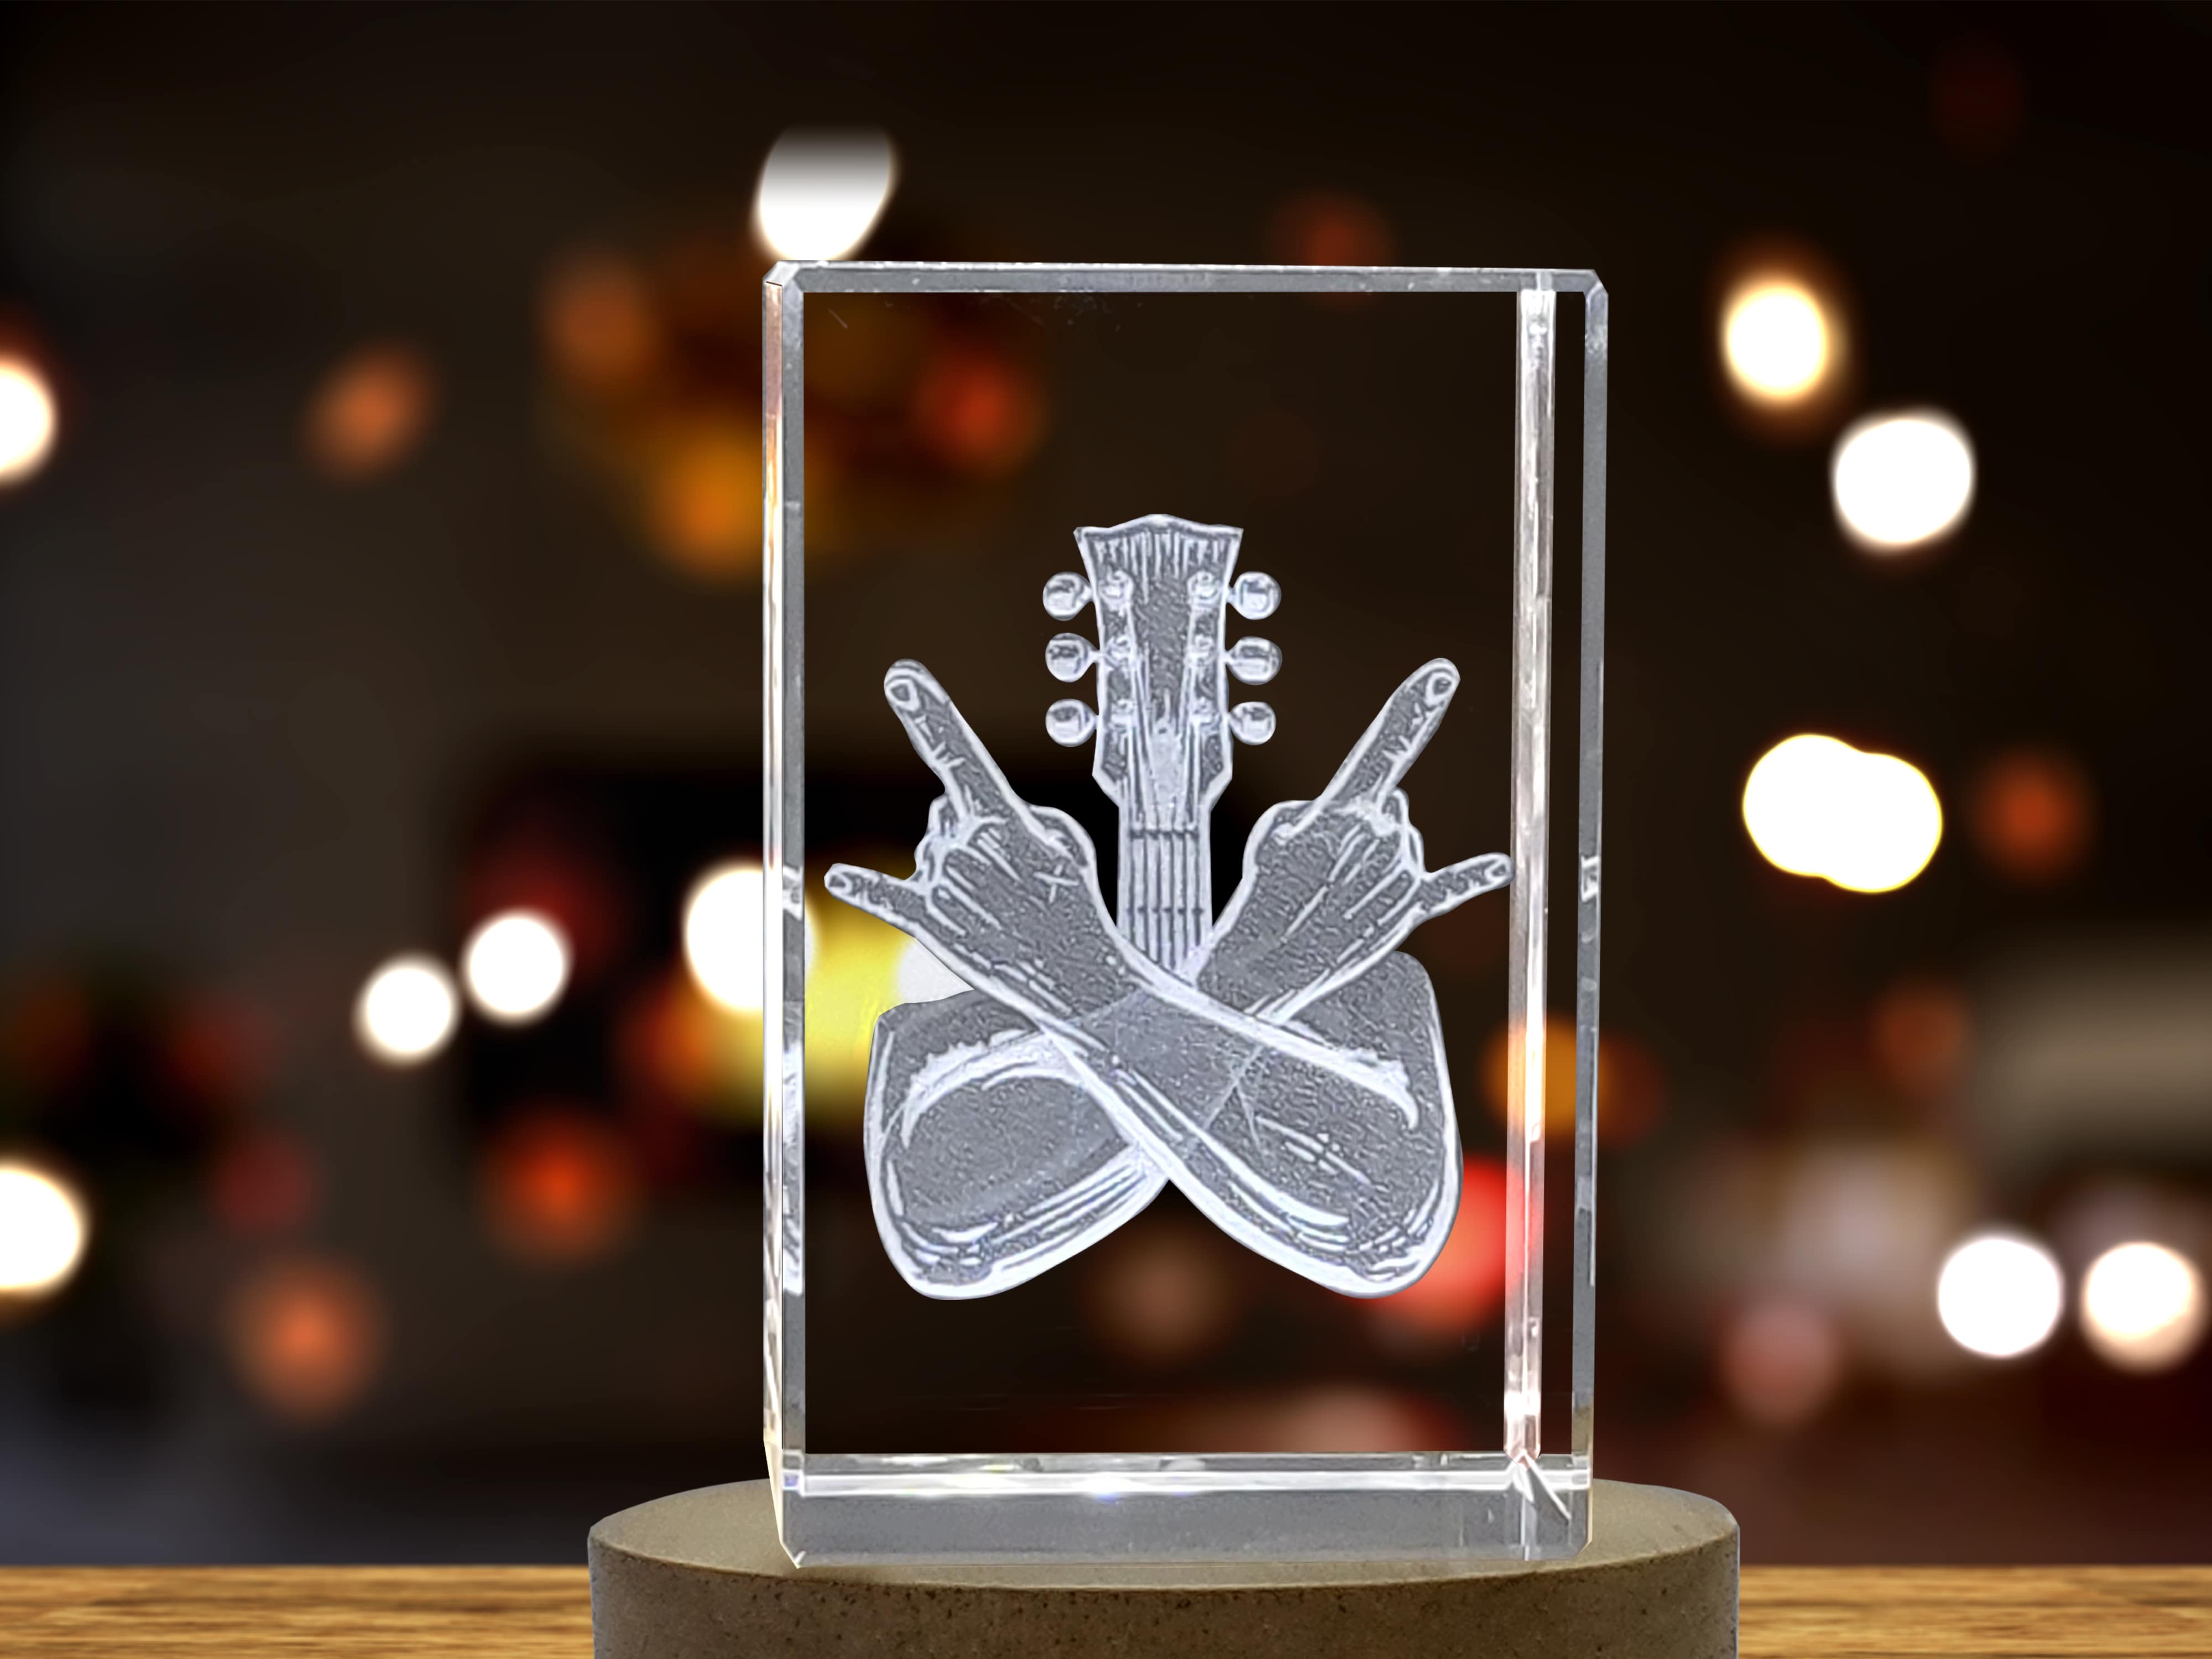 Unique 3D Engraved Crystal with Crossed Hands Rock n Roll Gesture and Guitar Design - Perfect Gift for Music Lovers A&B Crystal Collection